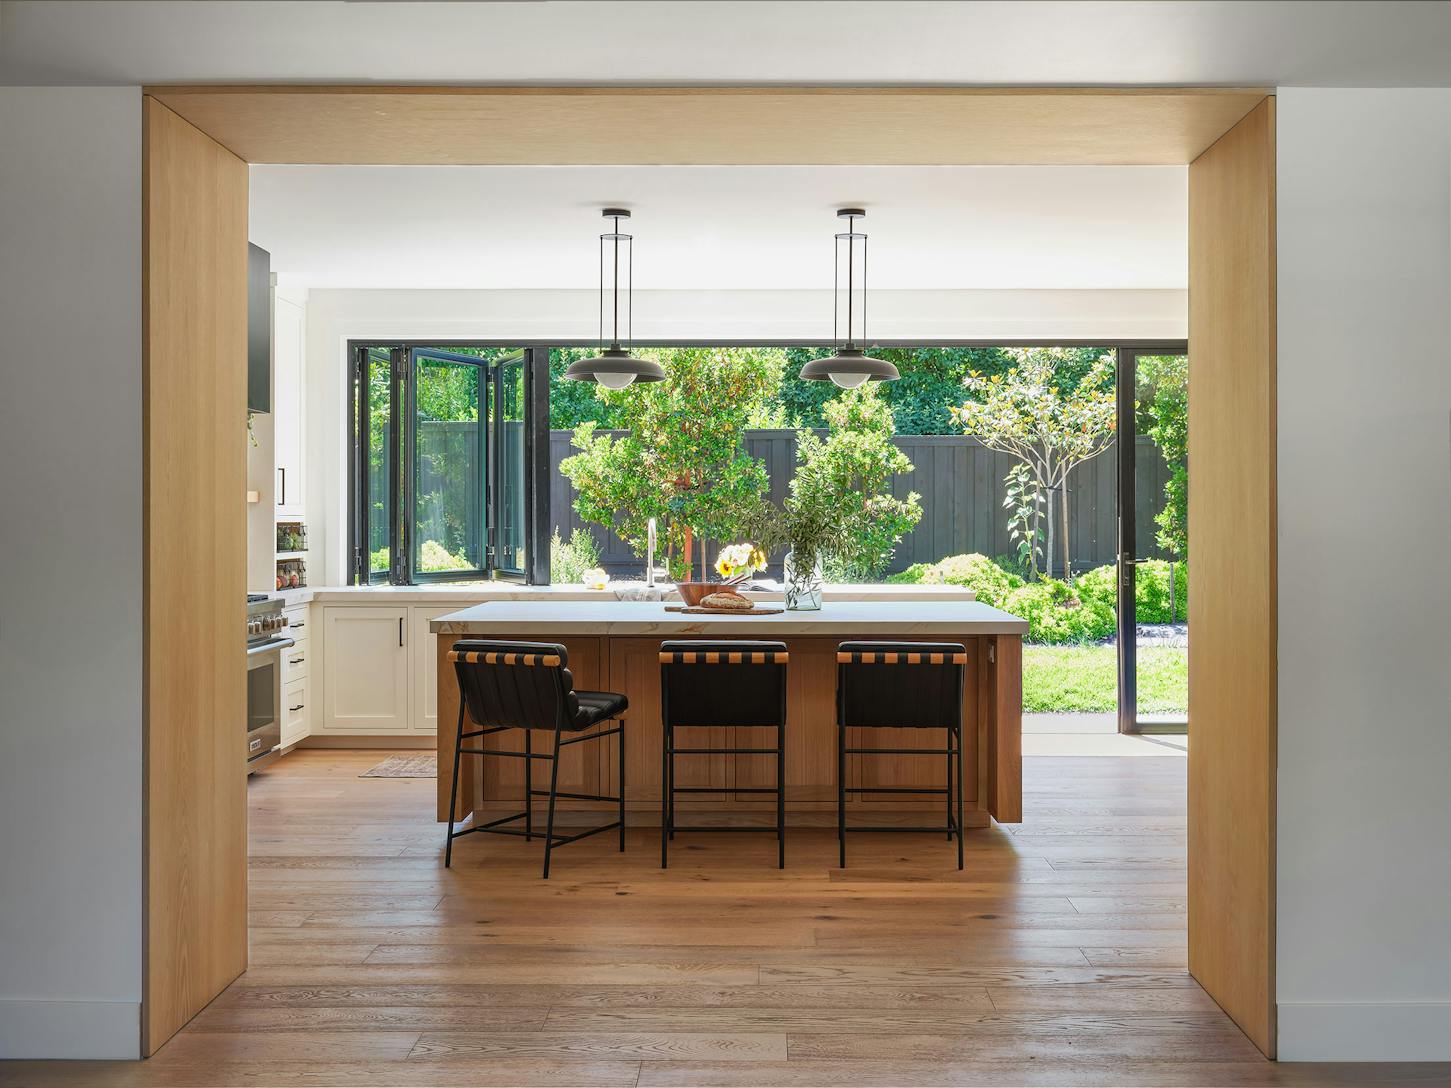 A modern kitchen with wood floors and a view of the outdoors through a window and door combination